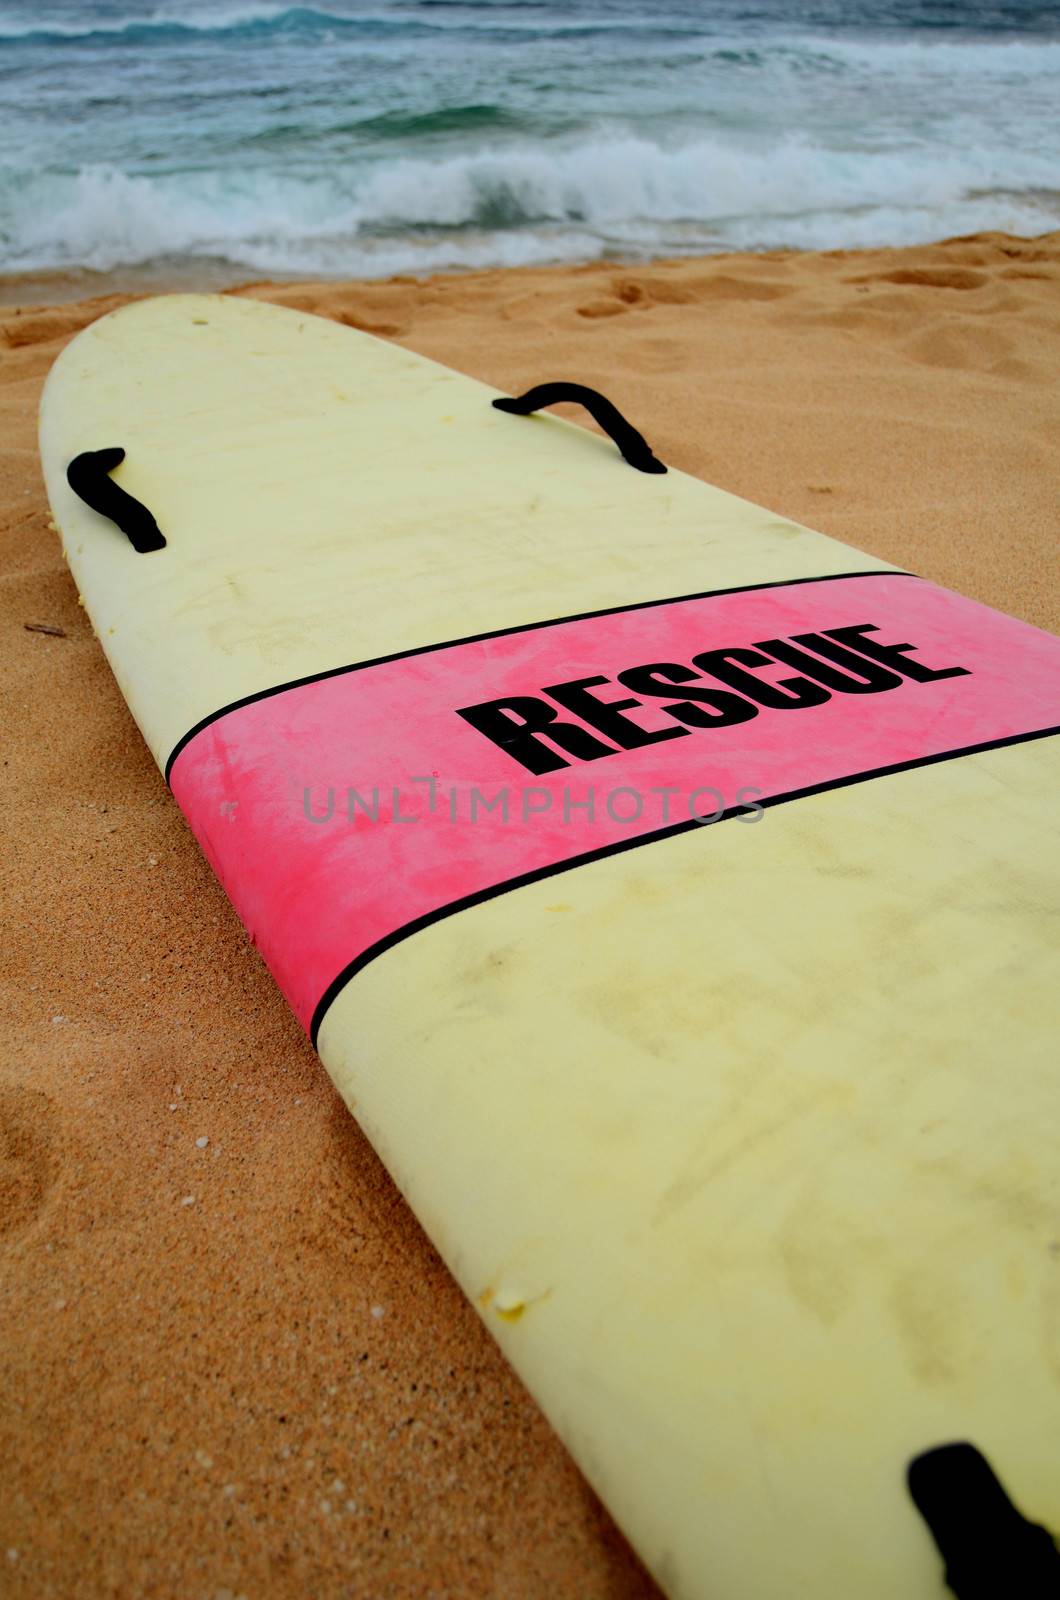 A Lifeguard's Rescue Surfboard On A Hawaiian Beach On A Stormy Day